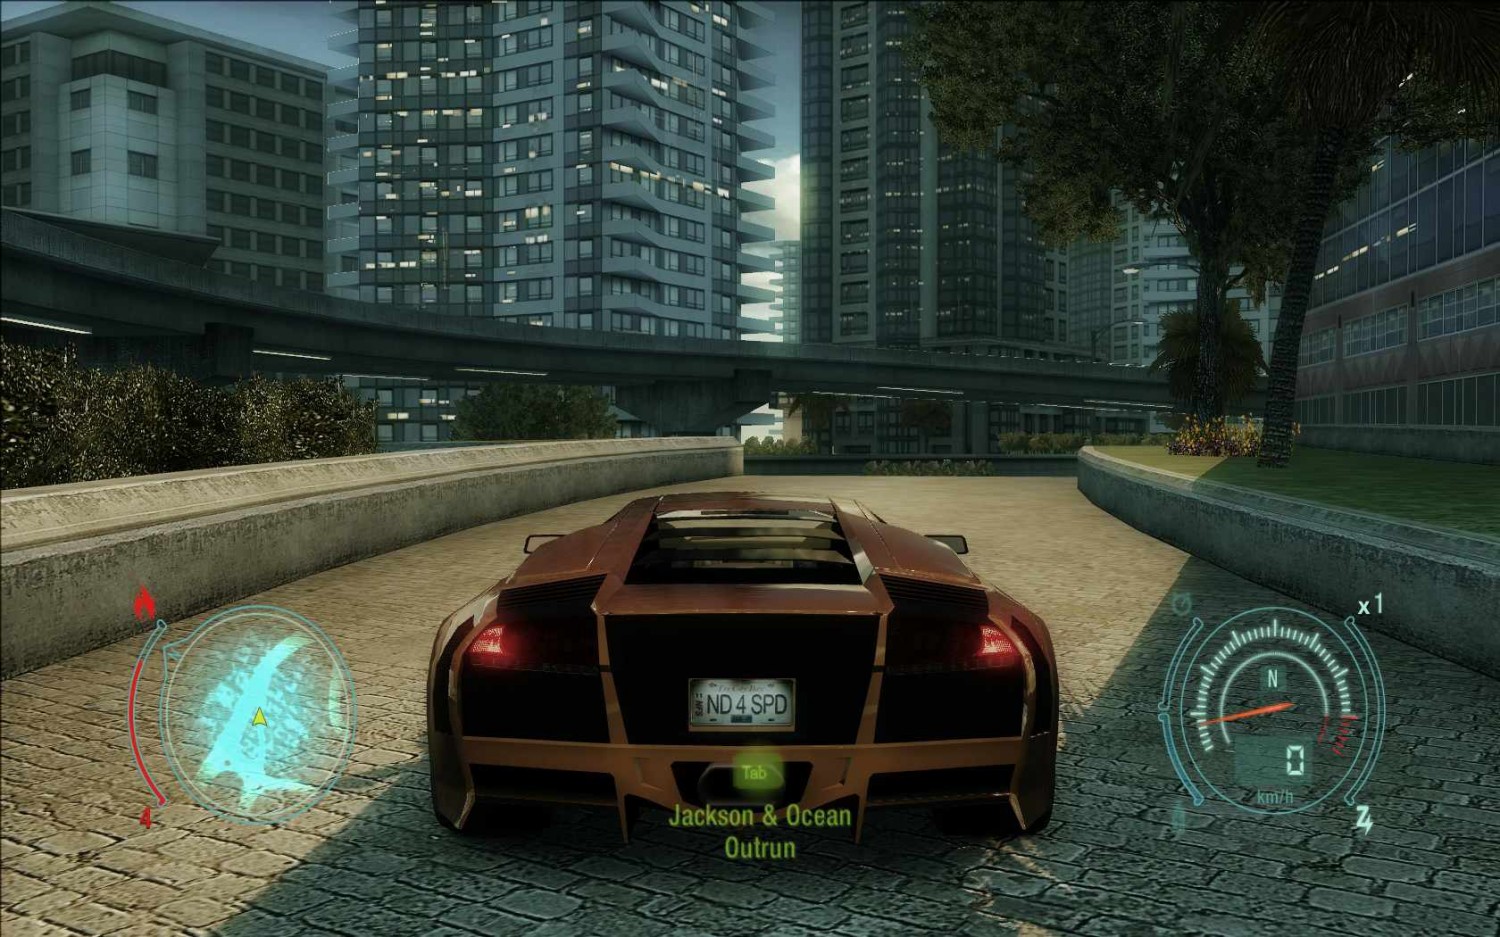 Download Need For Speed The Run Directx Patch